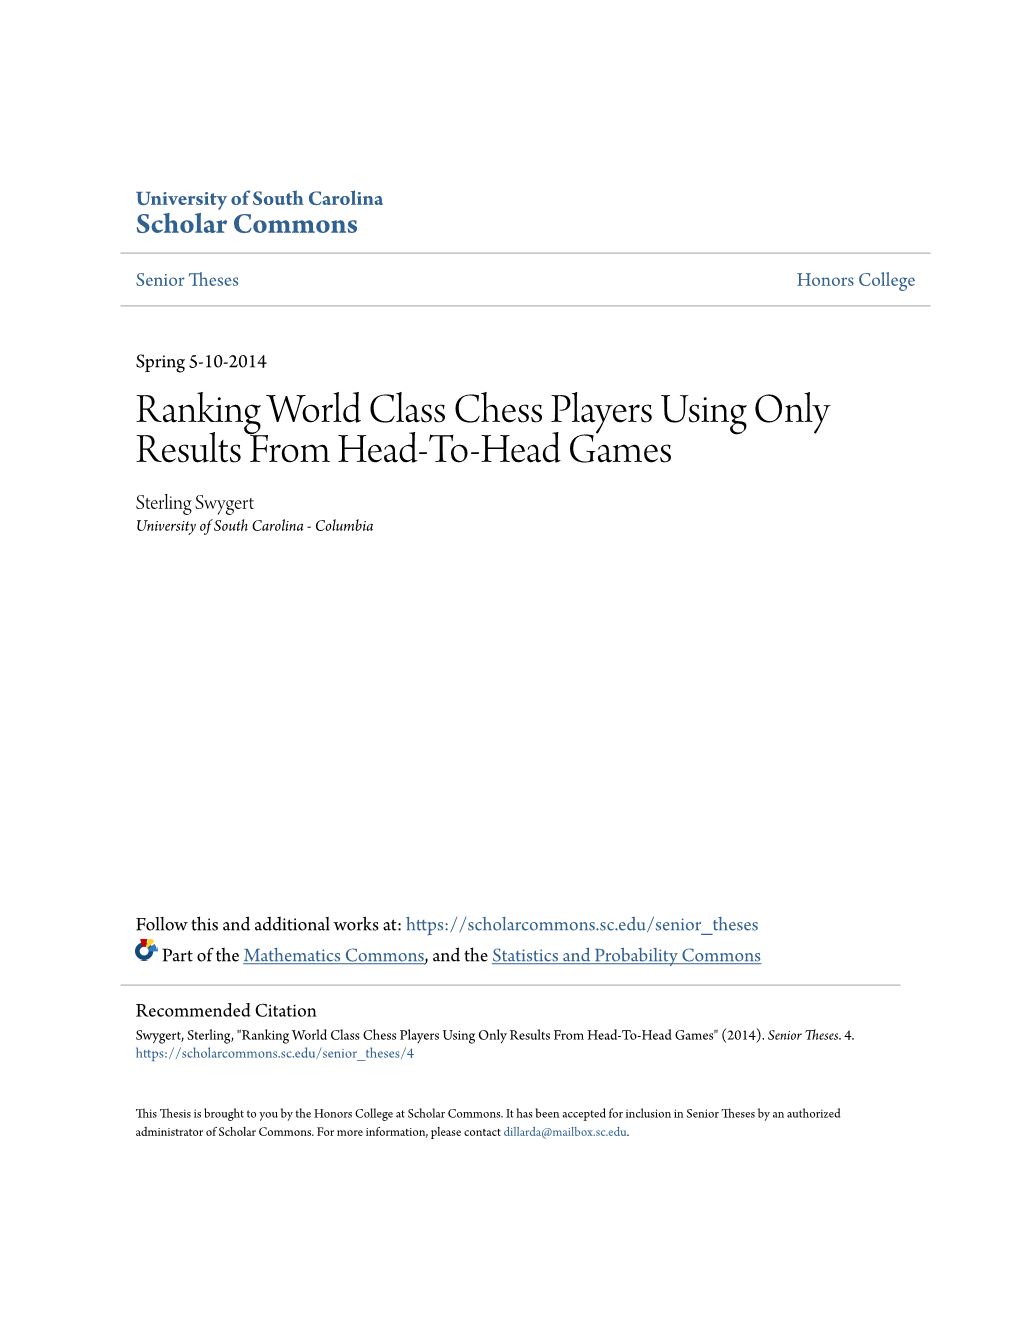 Ranking World Class Chess Players Using Only Results from Head-To-Head Games Sterling Swygert University of South Carolina - Columbia